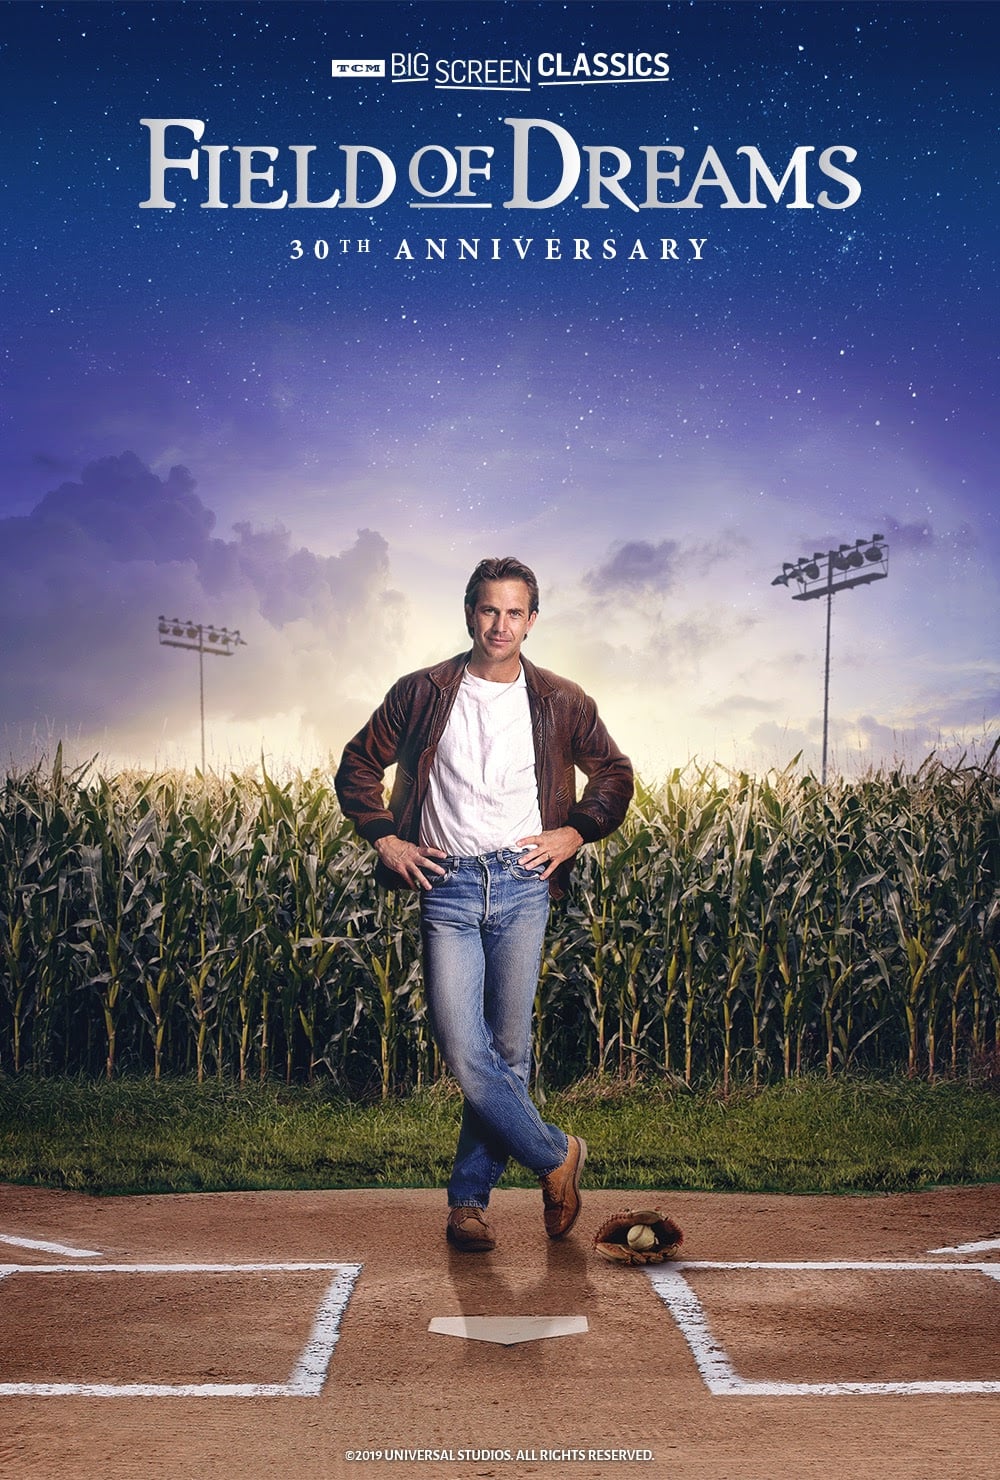 Field of Dreams' returns to the big screen